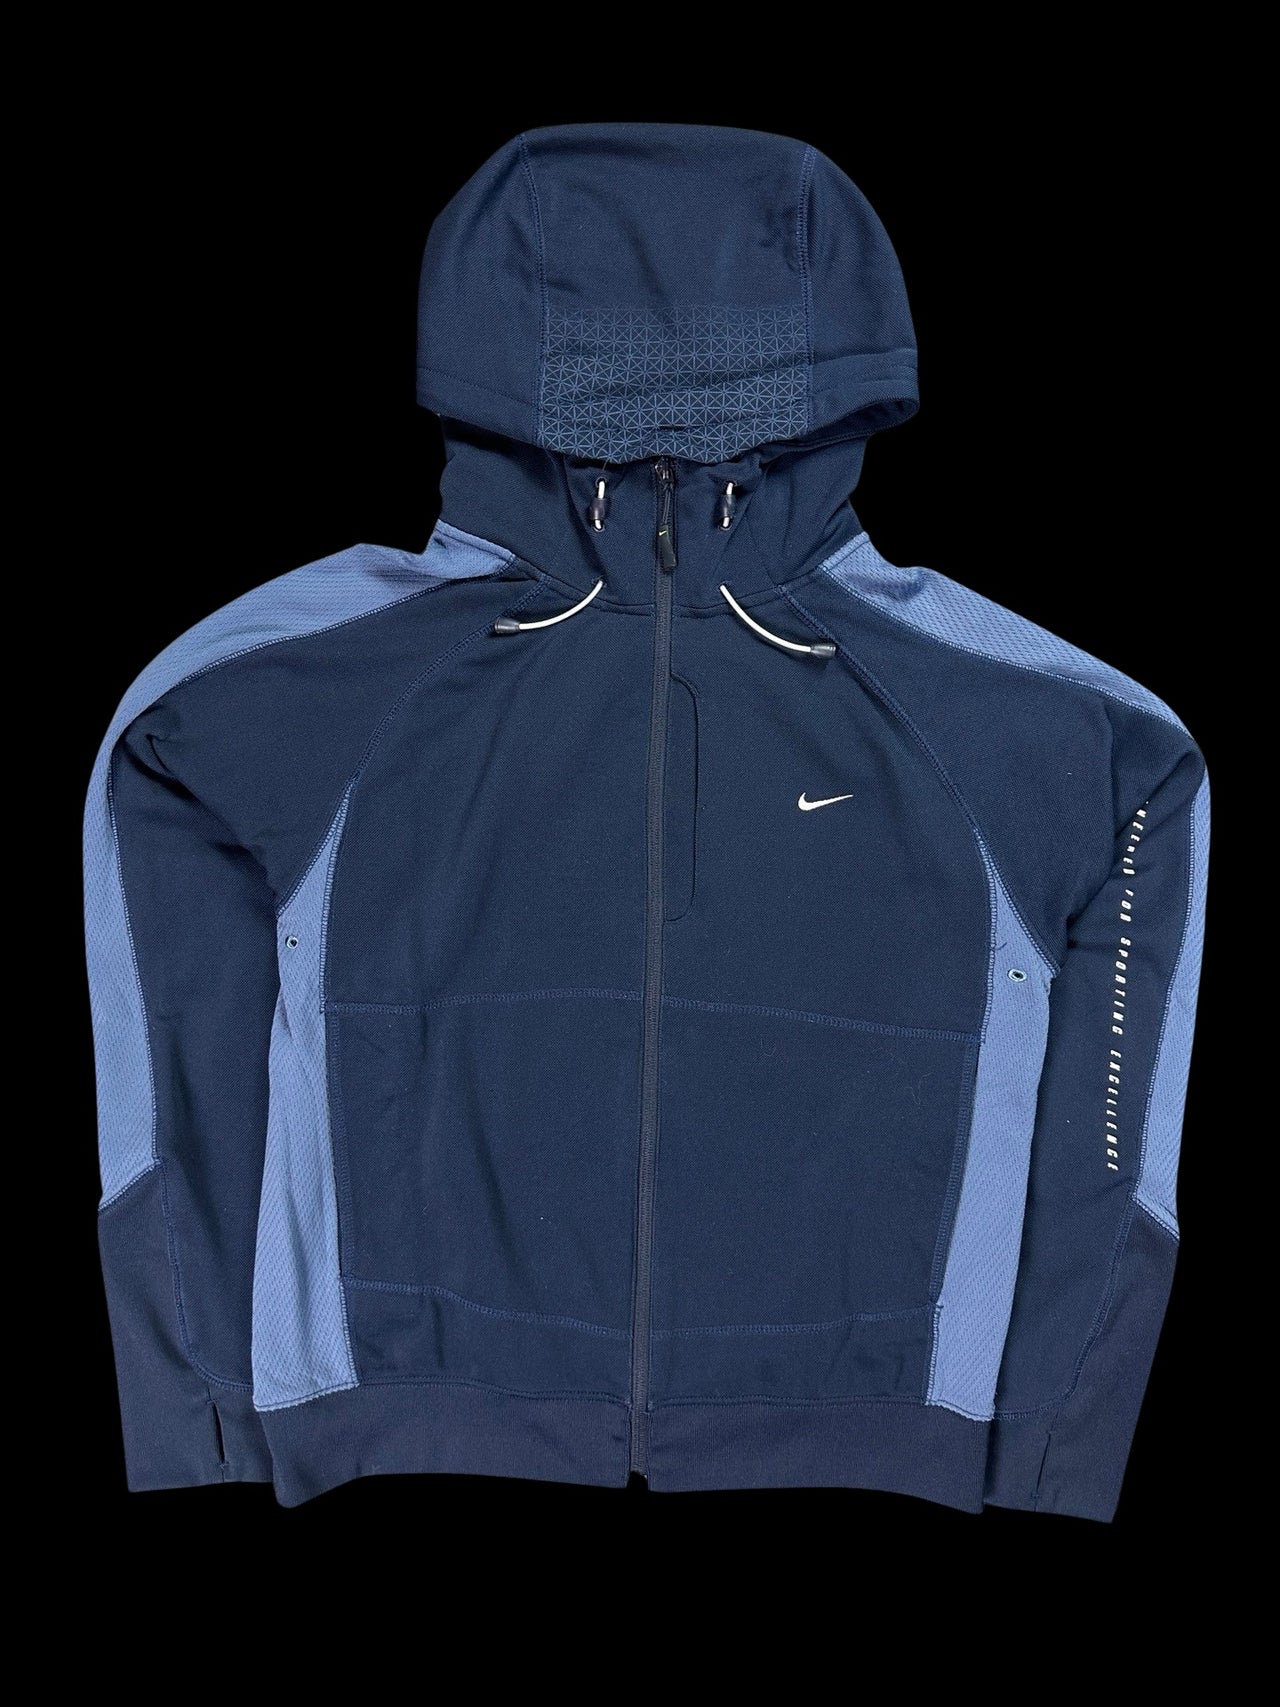 Nike Sporting Excellence Jacket (S)